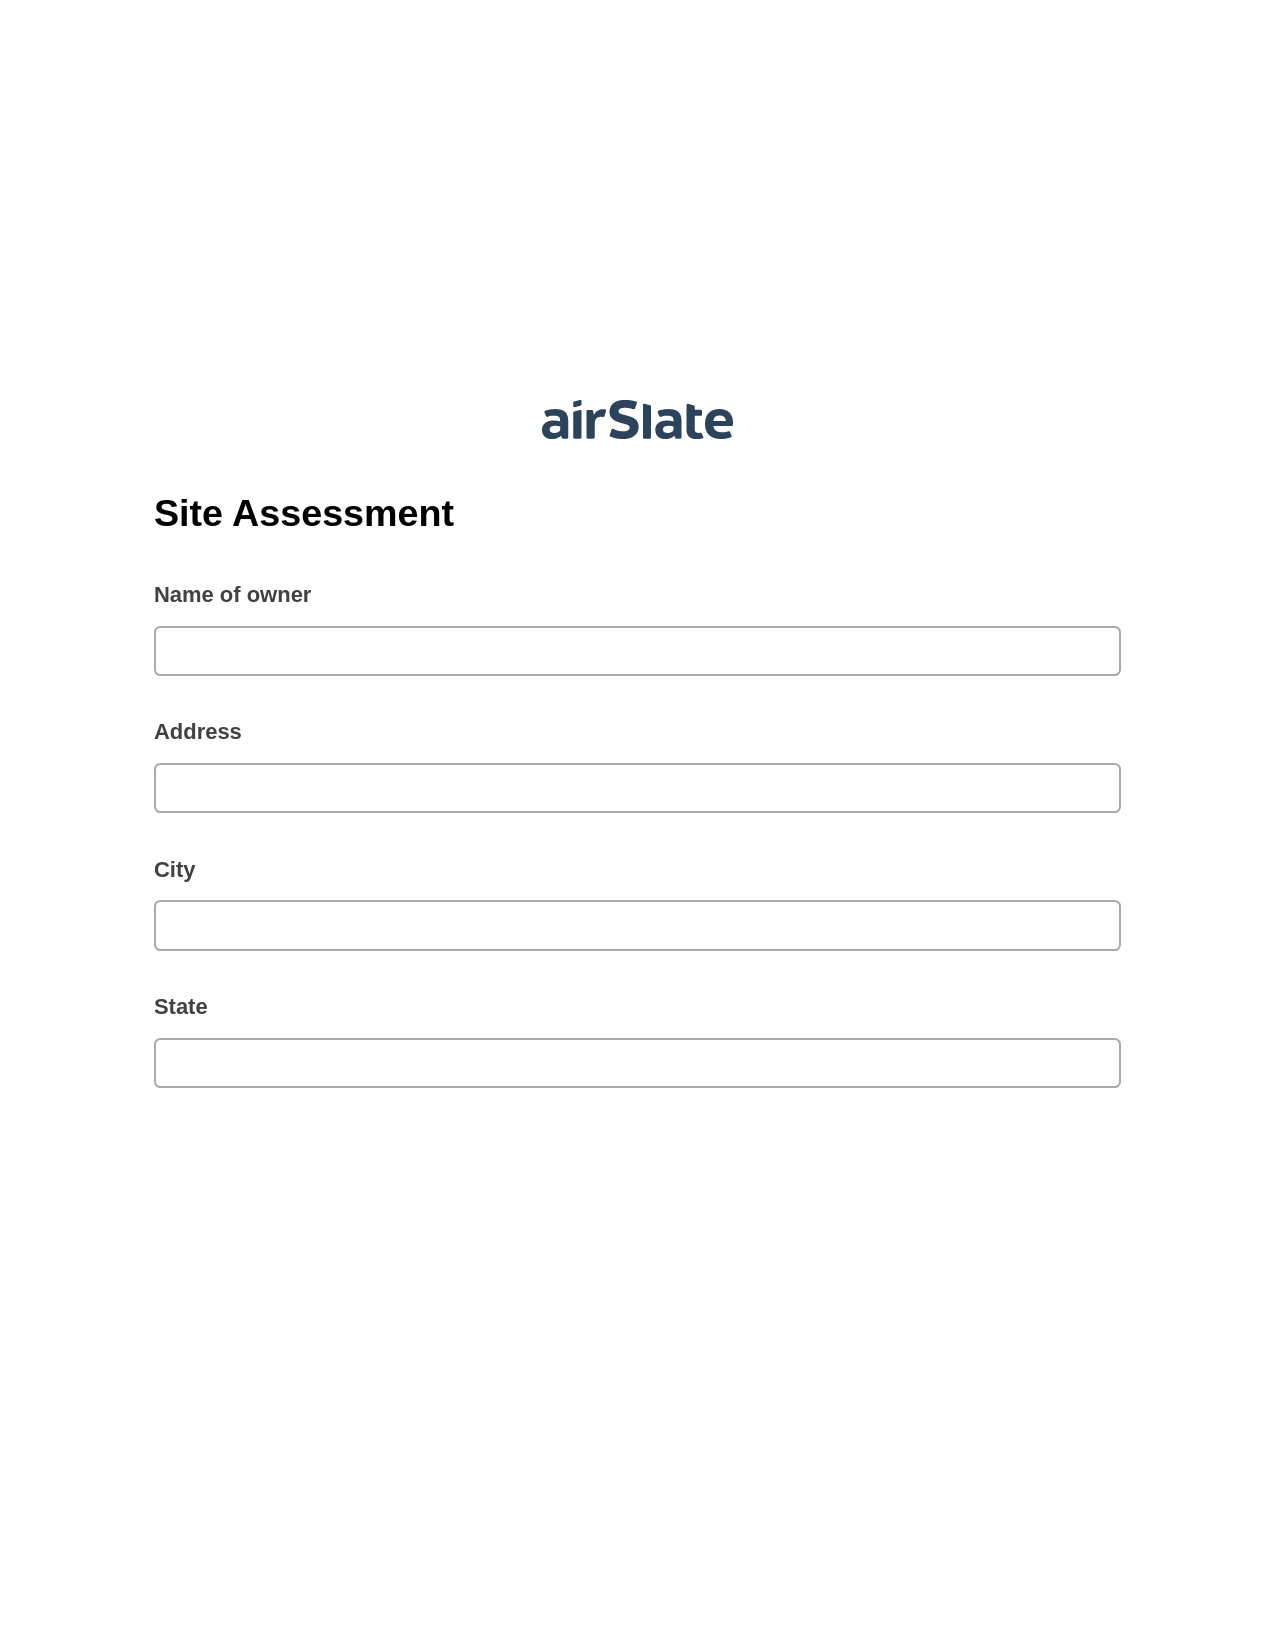 Site Assessment Pre-fill from another Slate Bot, Audit Trail Bot, Export to Formstack Documents Bot